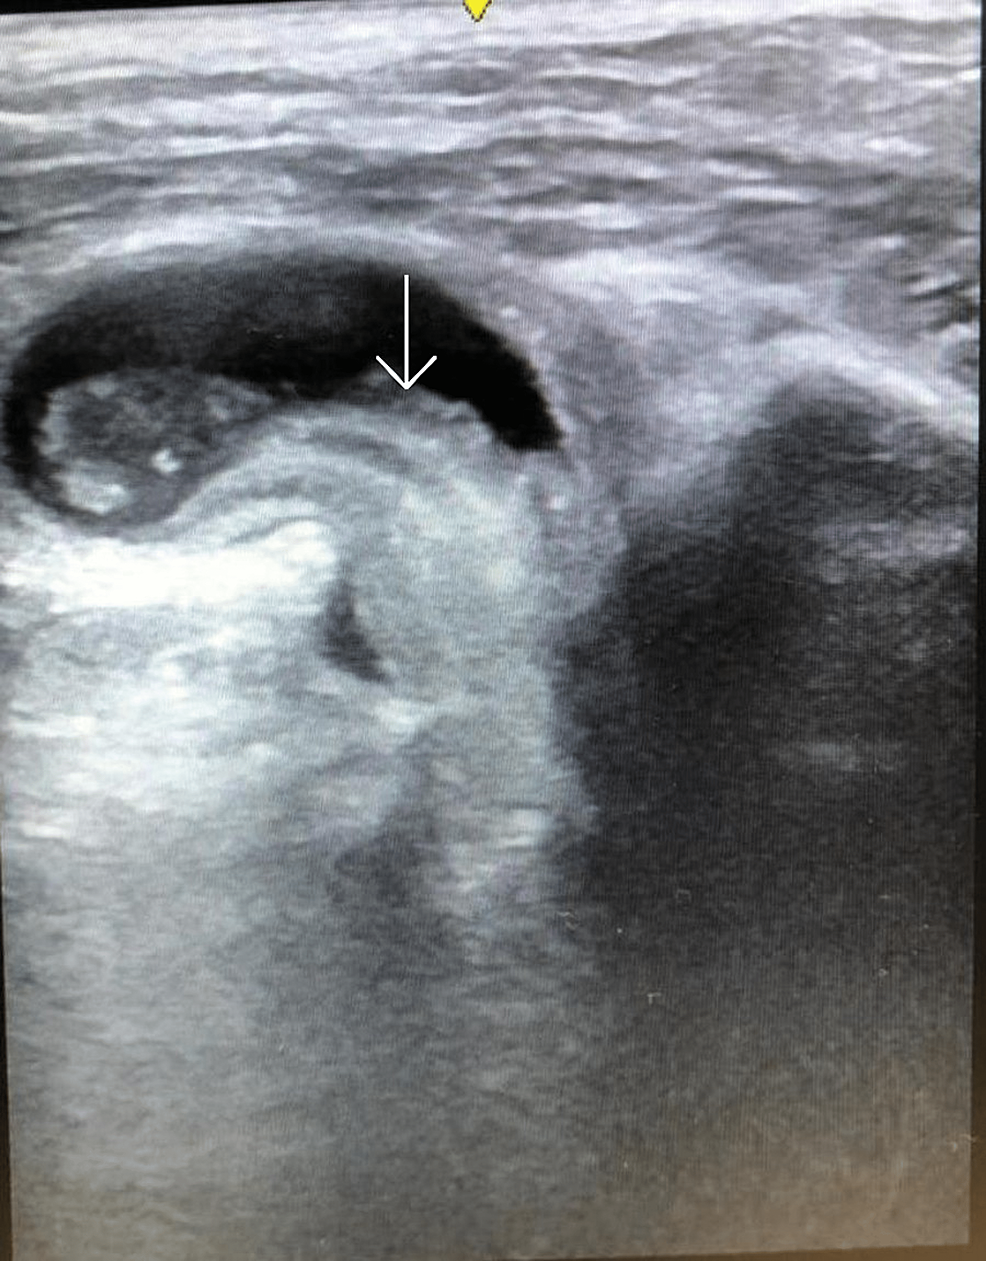 POCUS-scan-of-the-inguinal-region-(transverse-plane)-showing-the-obturator-hernia-with-incarcerated-loops-of-bowel-(white-arrow).